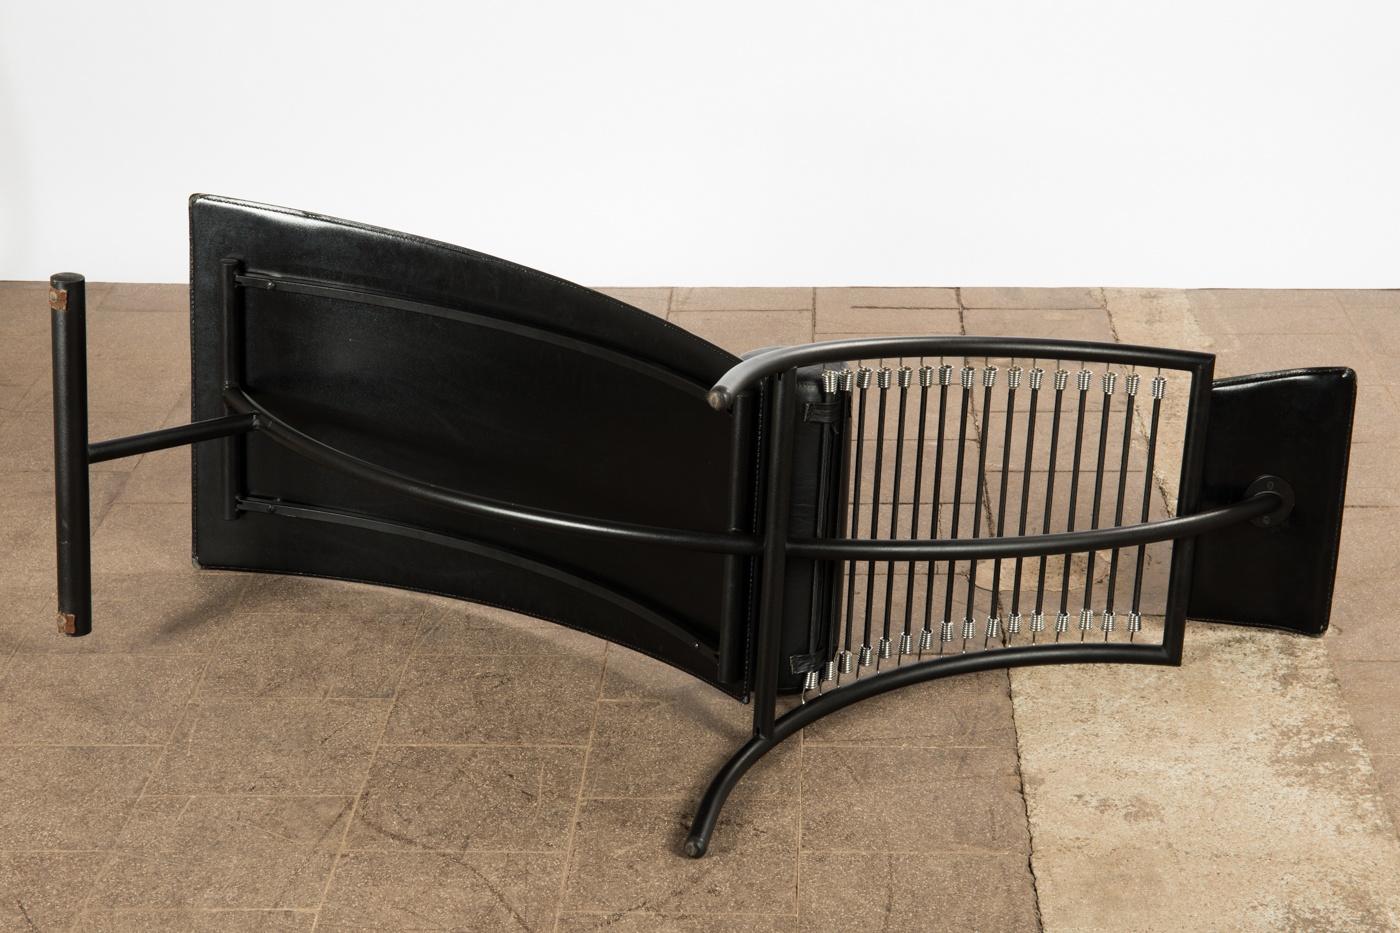 Post-modern chaise longue chair Italian design, circa 1980s, curved construction in black lacquered metal and black leather upholstery.